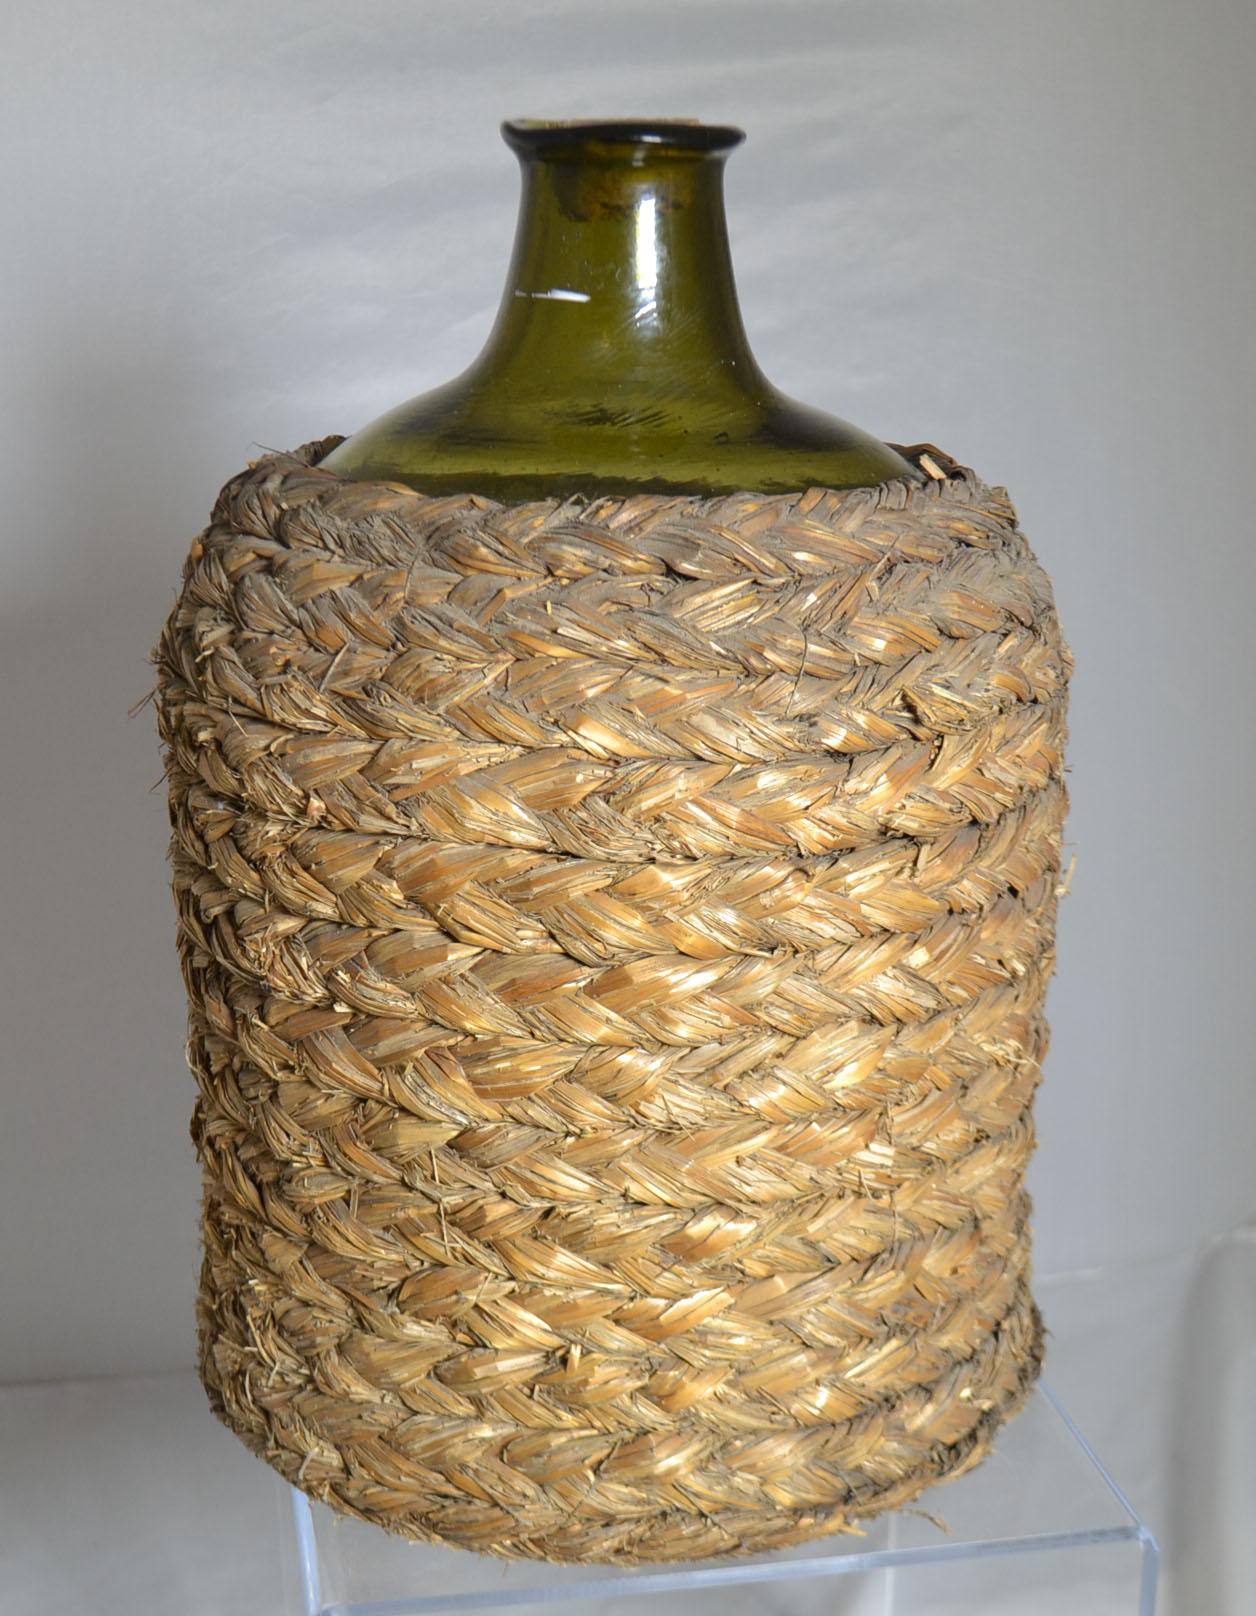 Mouth blown wine bottle with basket, circa 1860.